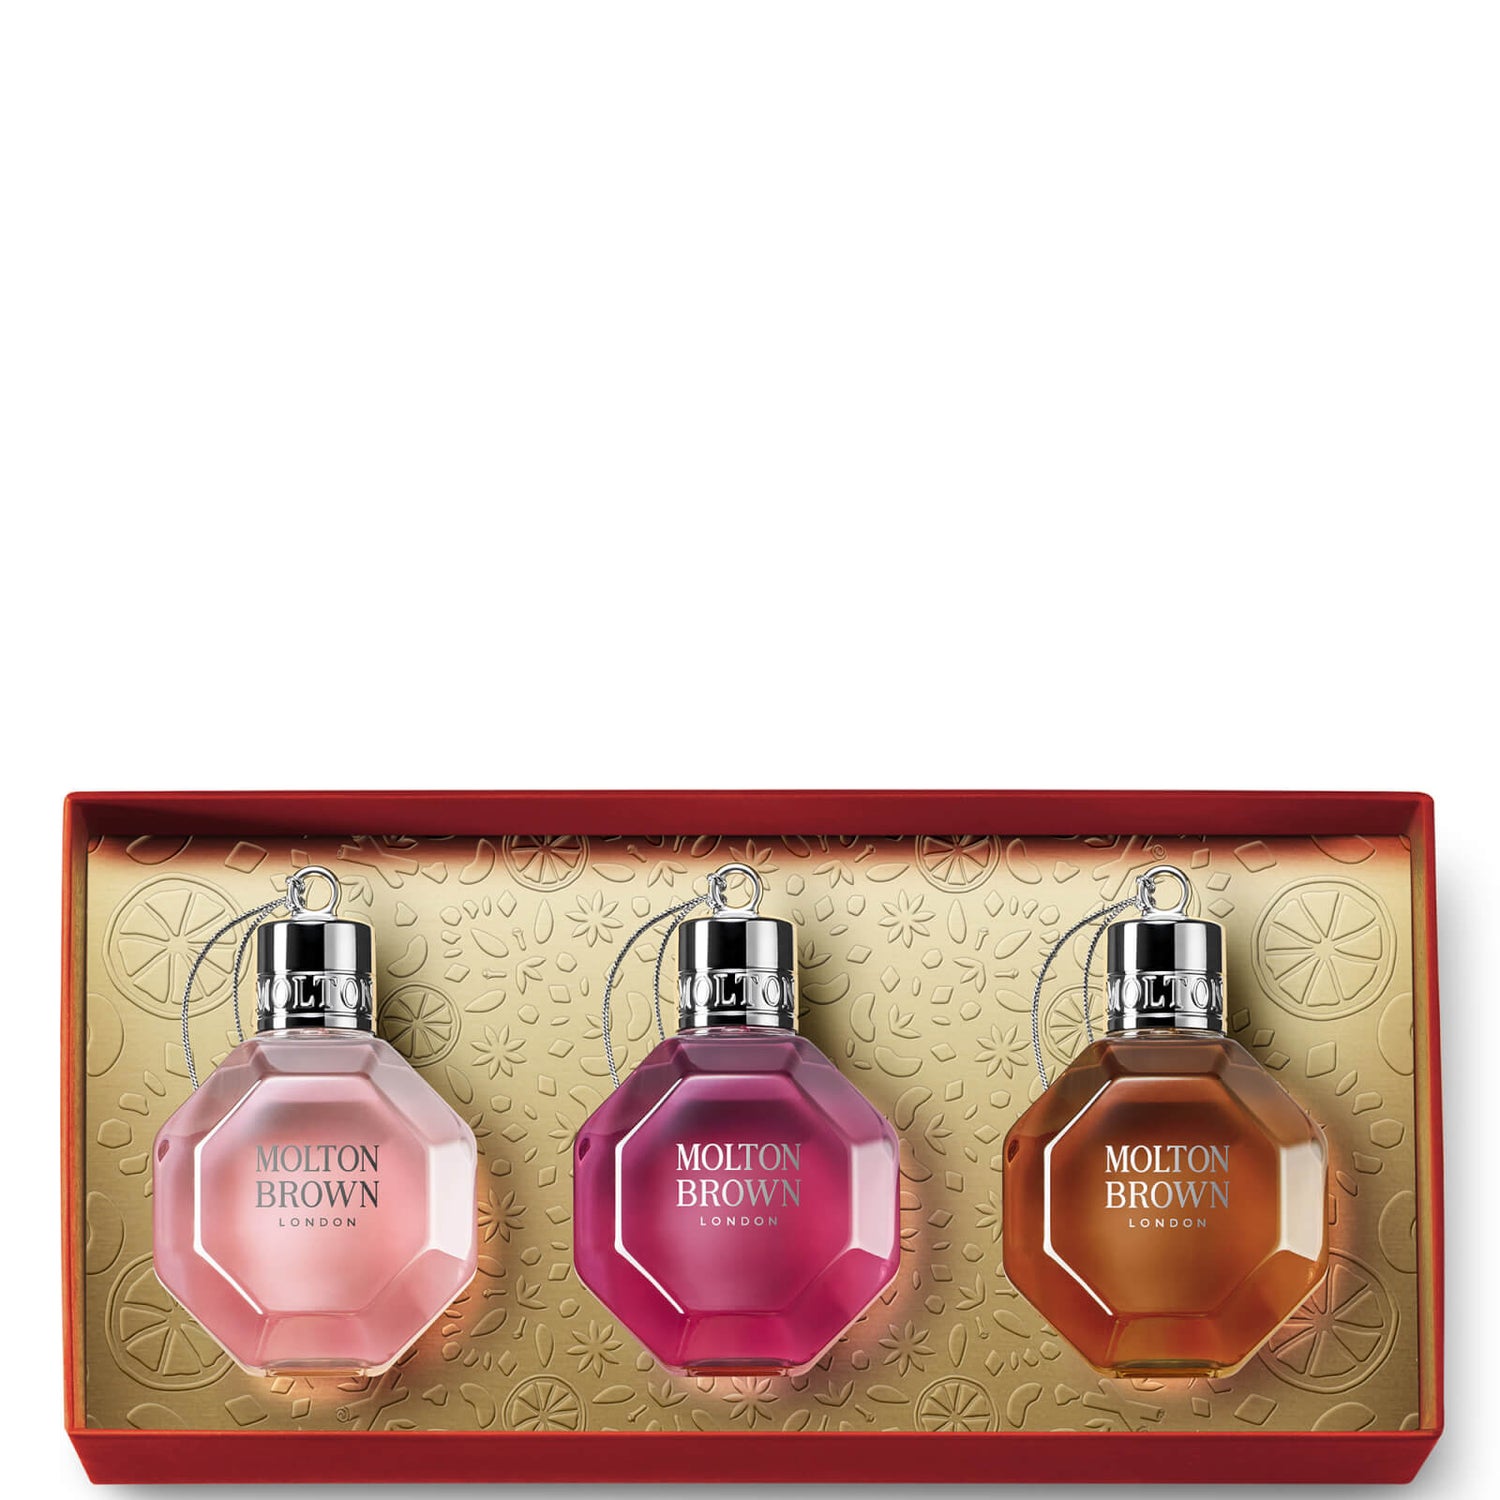 Molton Brown Festive Bauble Gift Set (Worth £39.00)